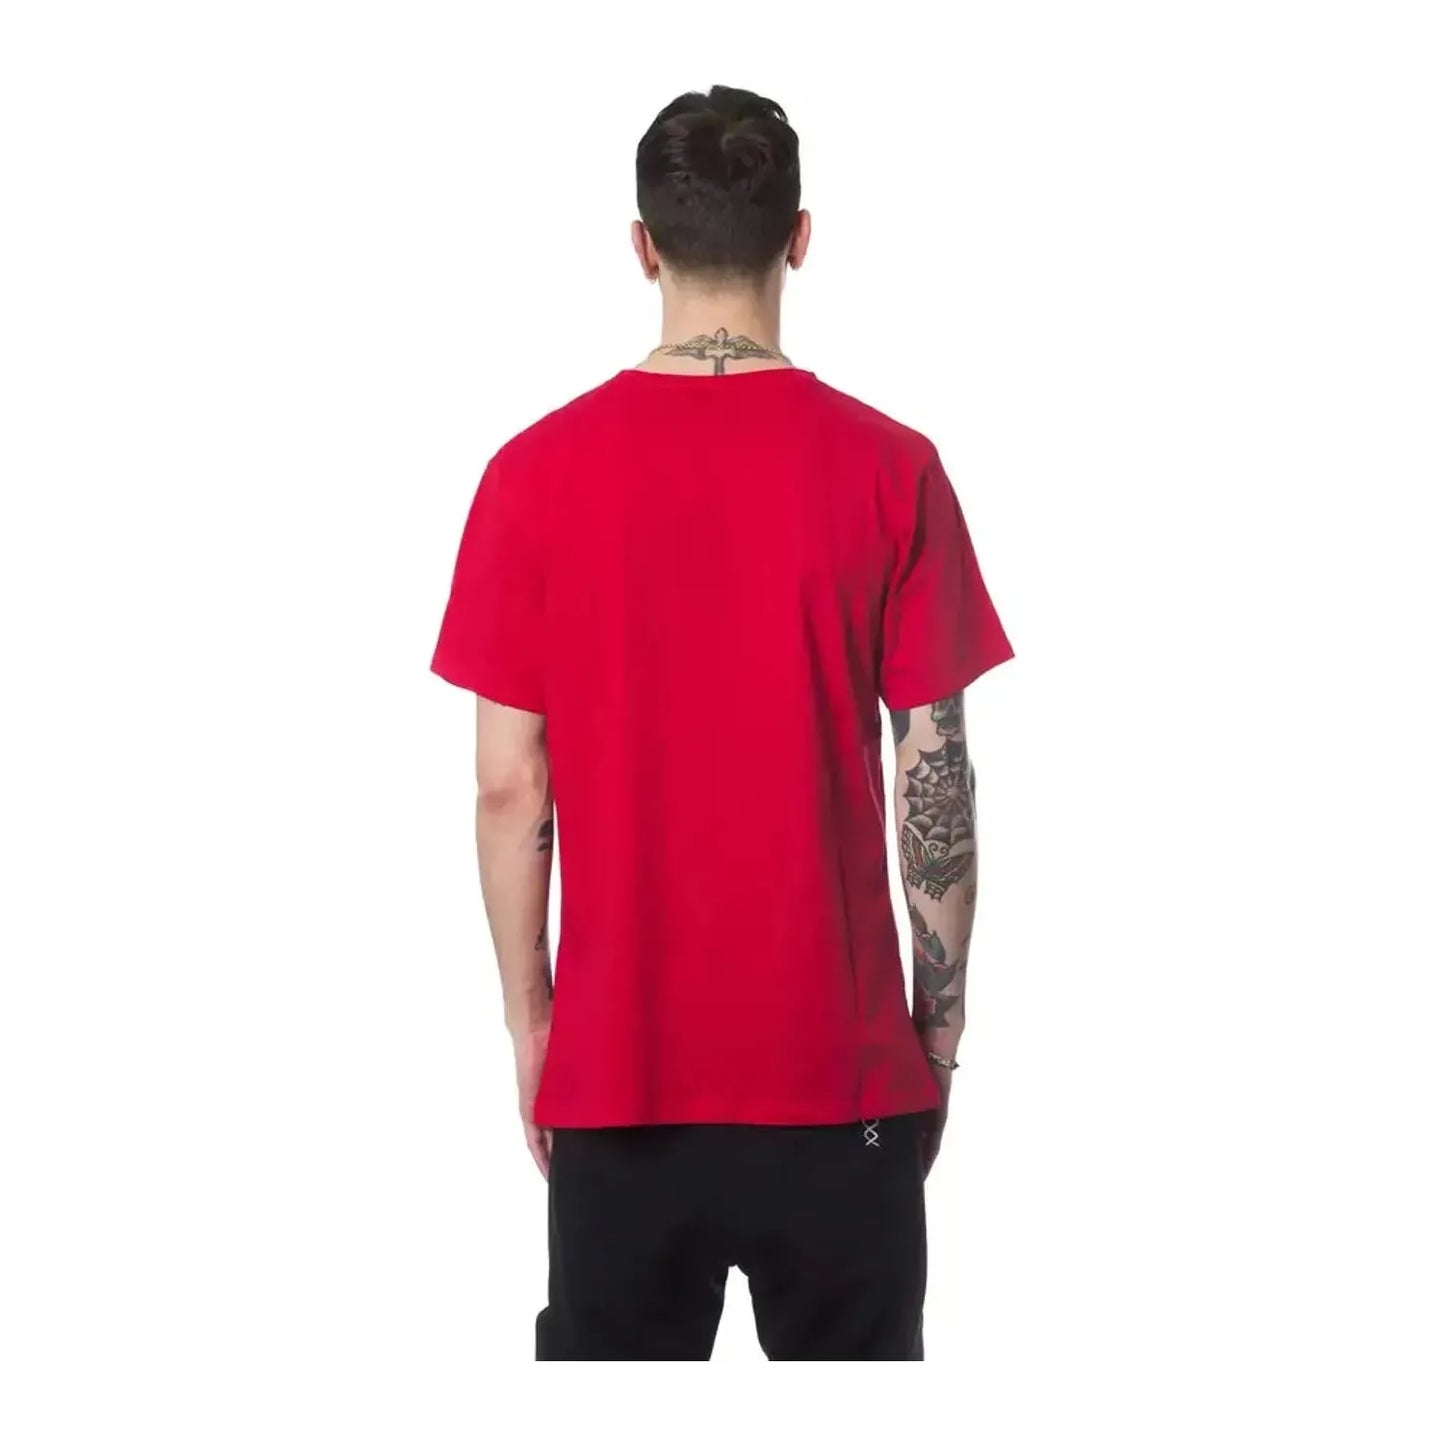 Nicolo Tonetto Elegant Red Round Neck Printed Tee rosso-red-t-shirt-1